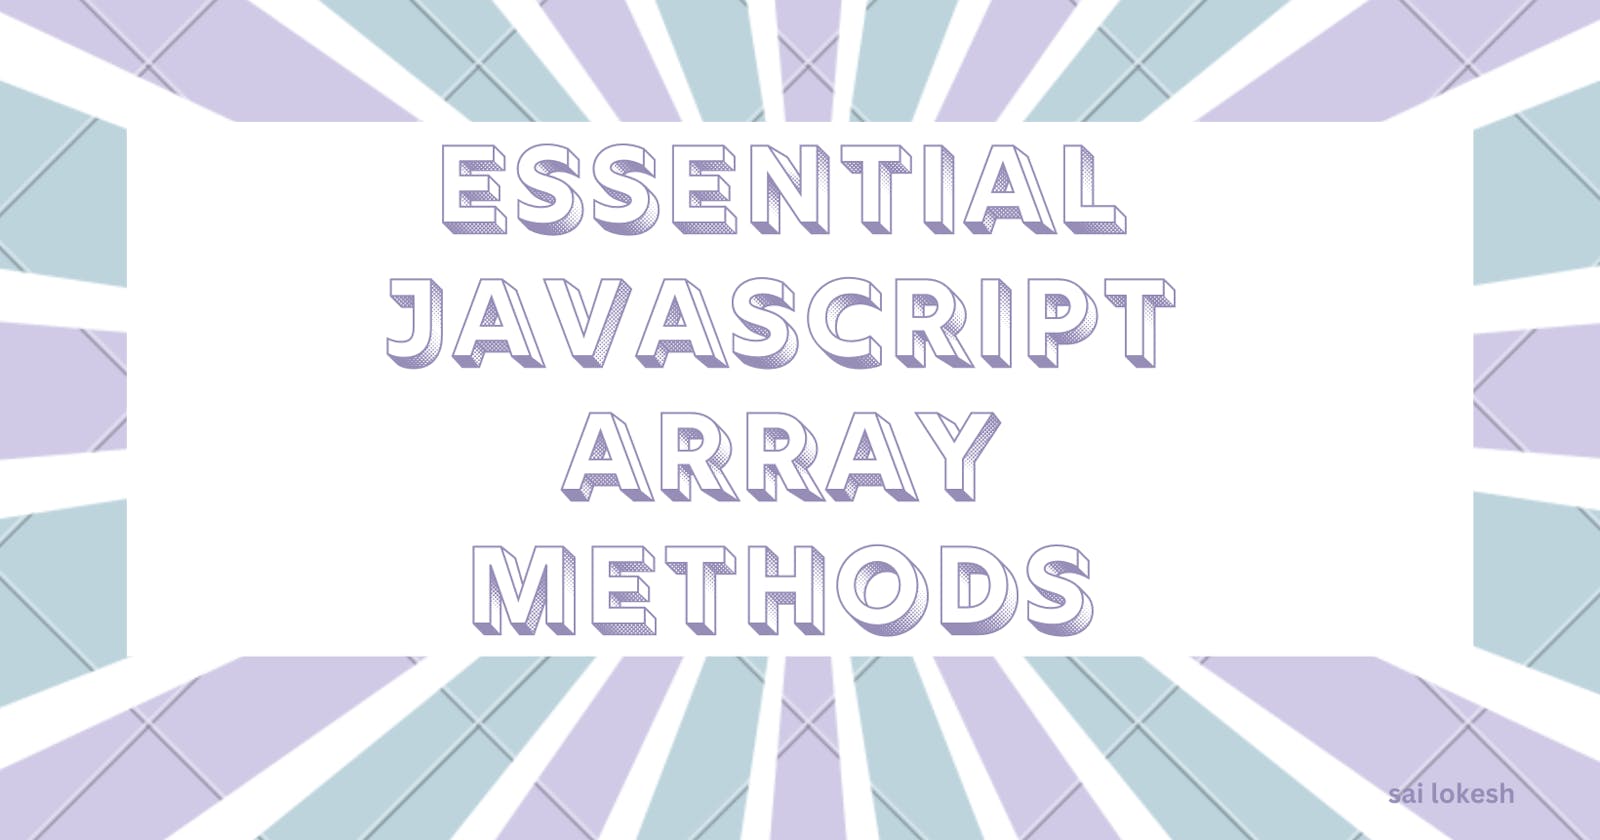 5 Essential Methods to Work with JS Arrays